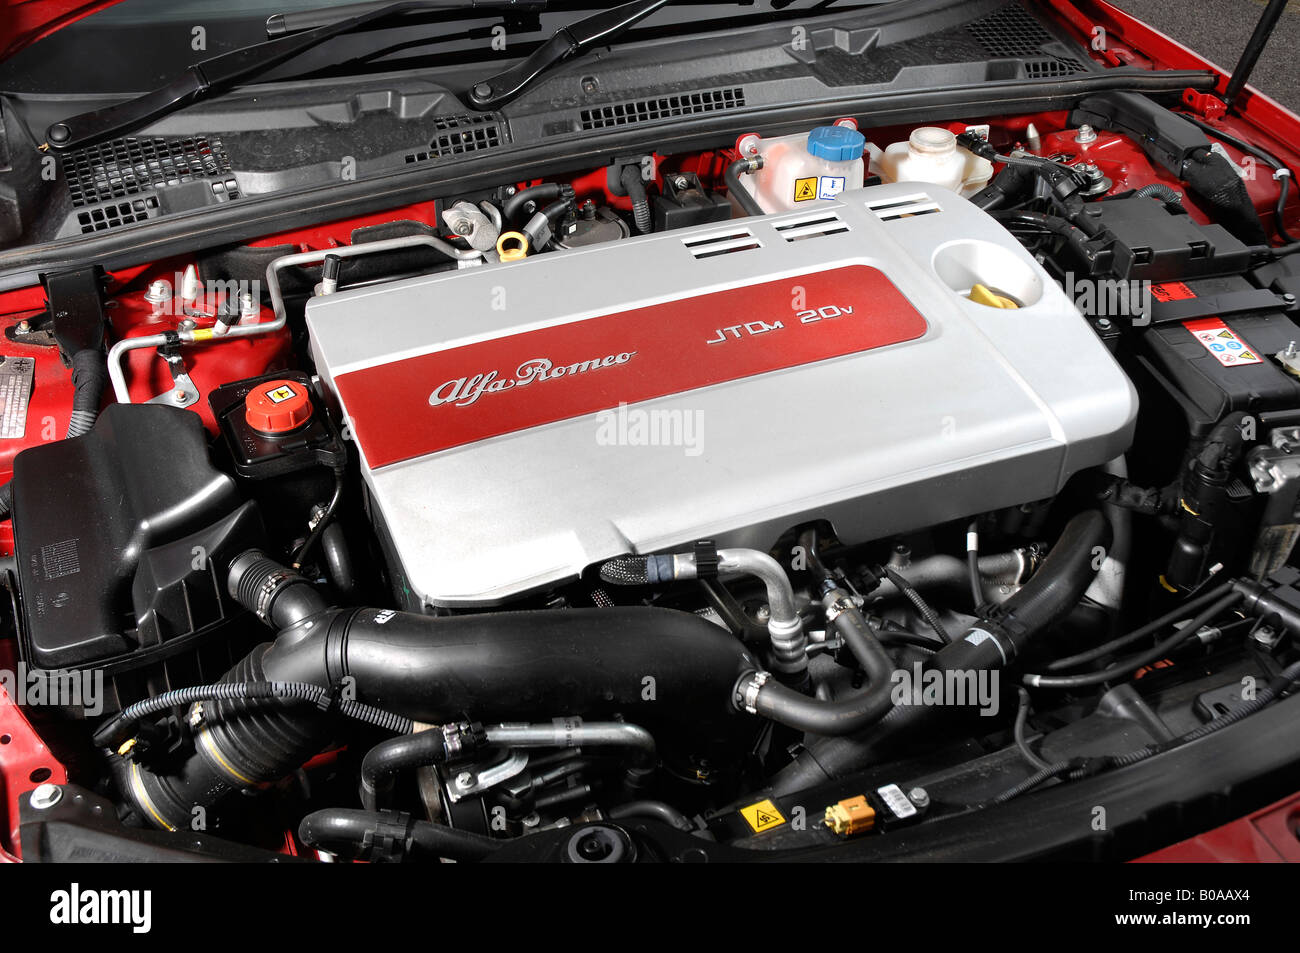 Alfa romeo 159 engine hi-res stock photography and images - Alamy